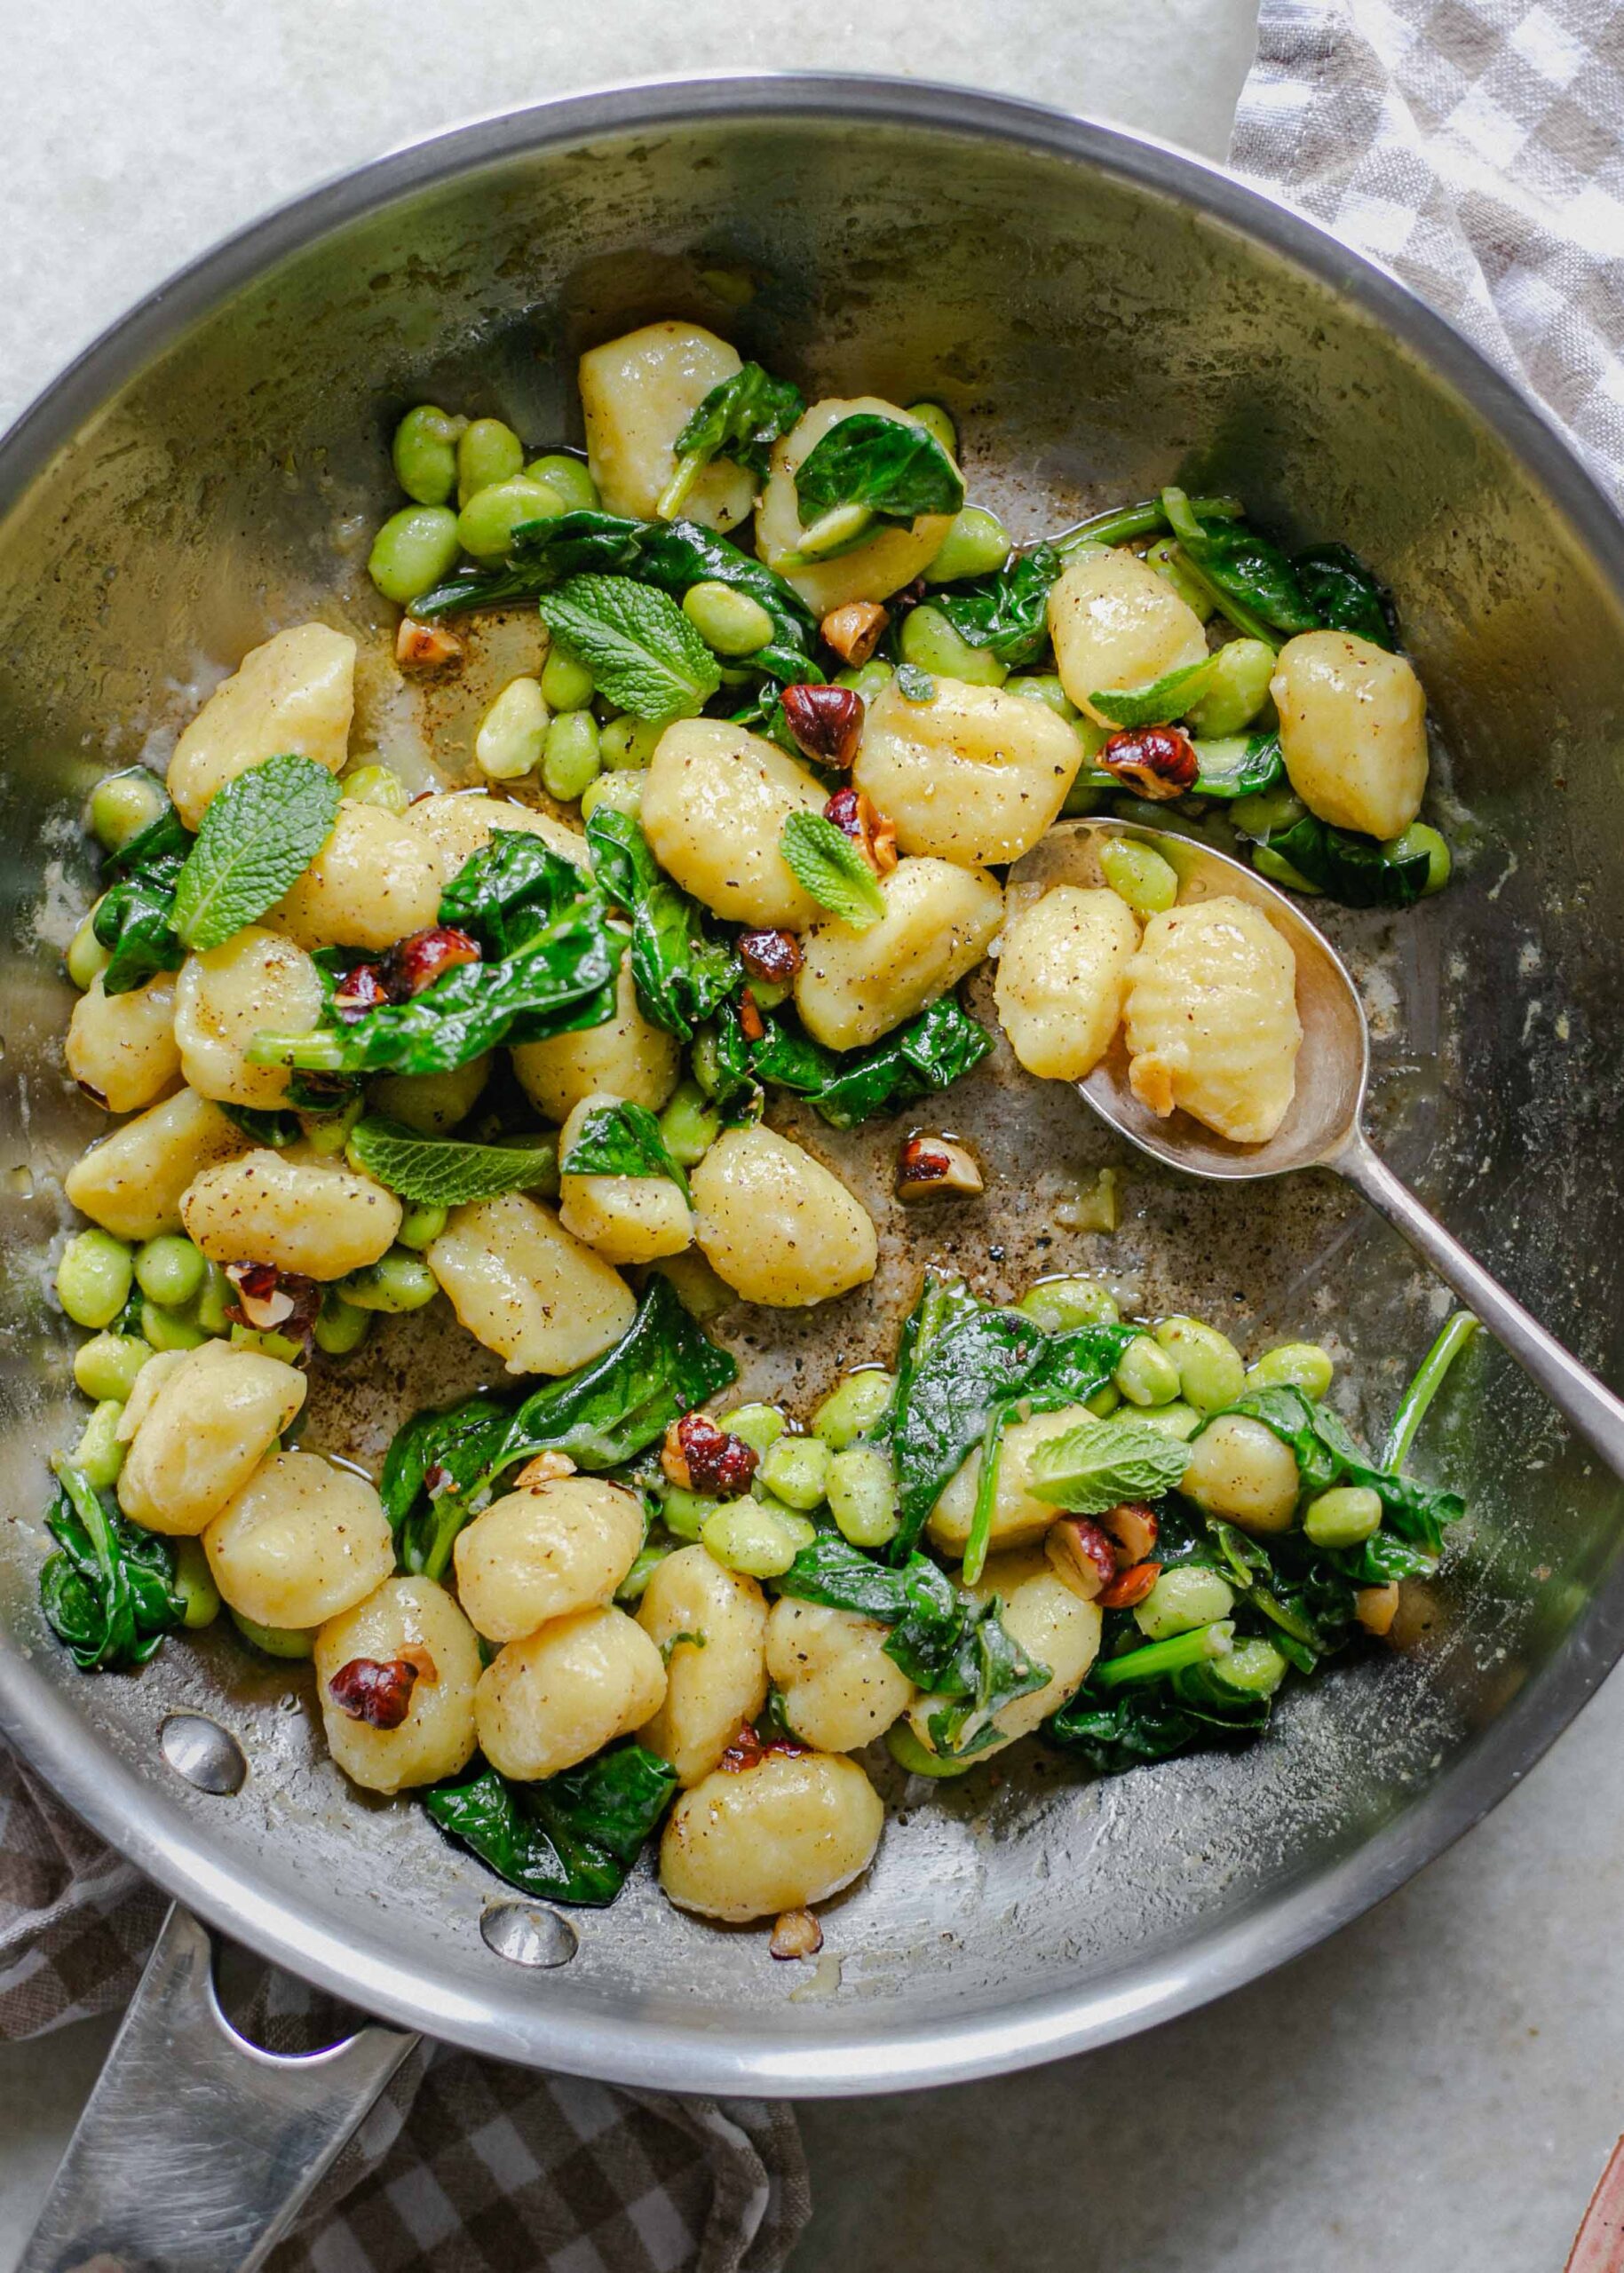 A frying pan of gluten free gnocchi with brown butter, spinach, sprinkled with hazelnuts also low FODMAP